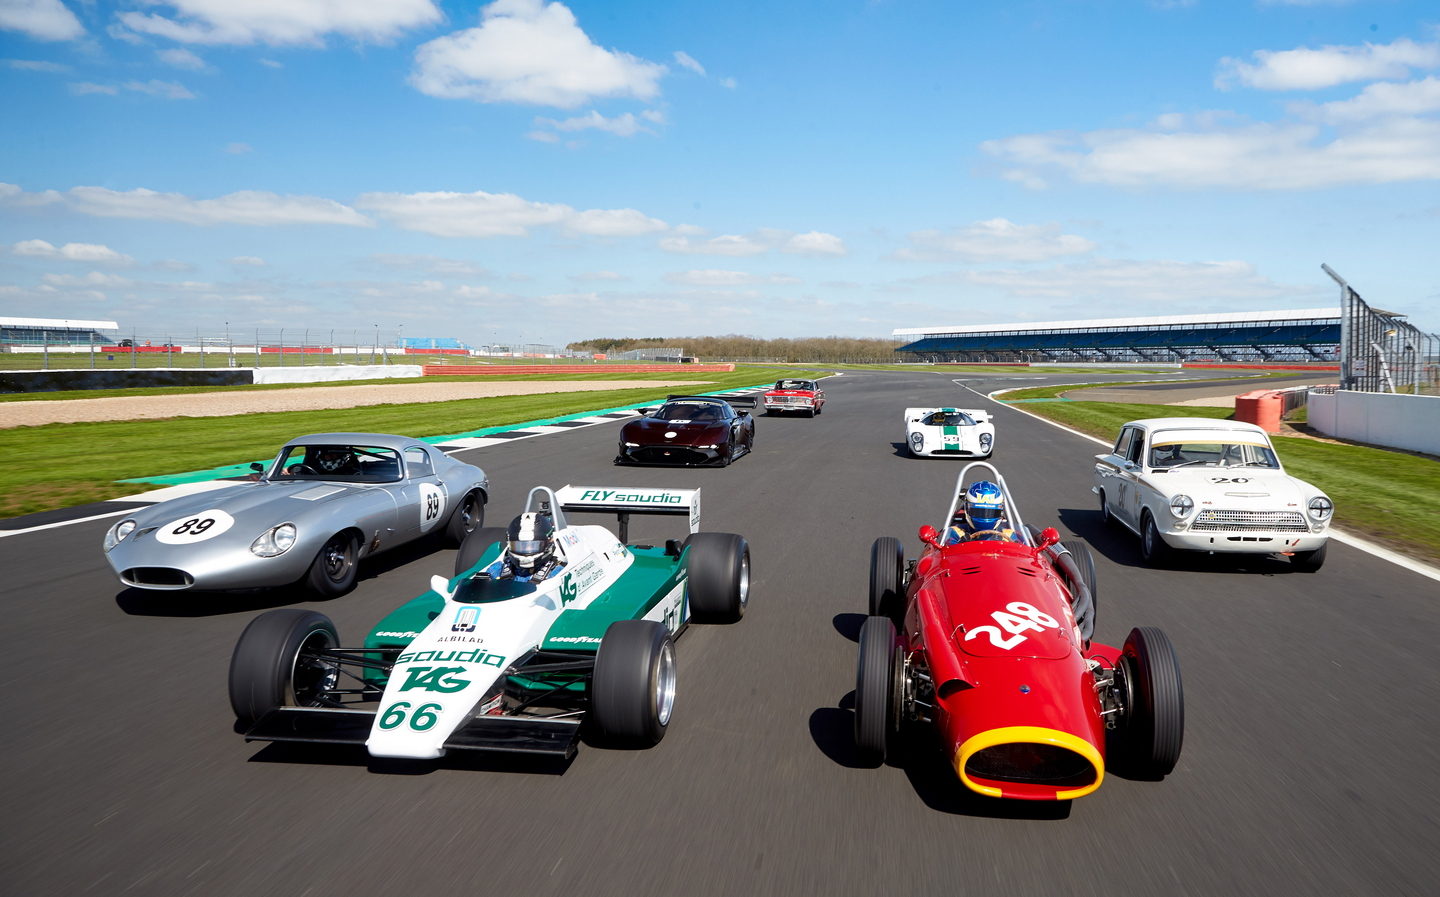 Silverstone Festival 2023 guide races, schedules, location and ticketing info